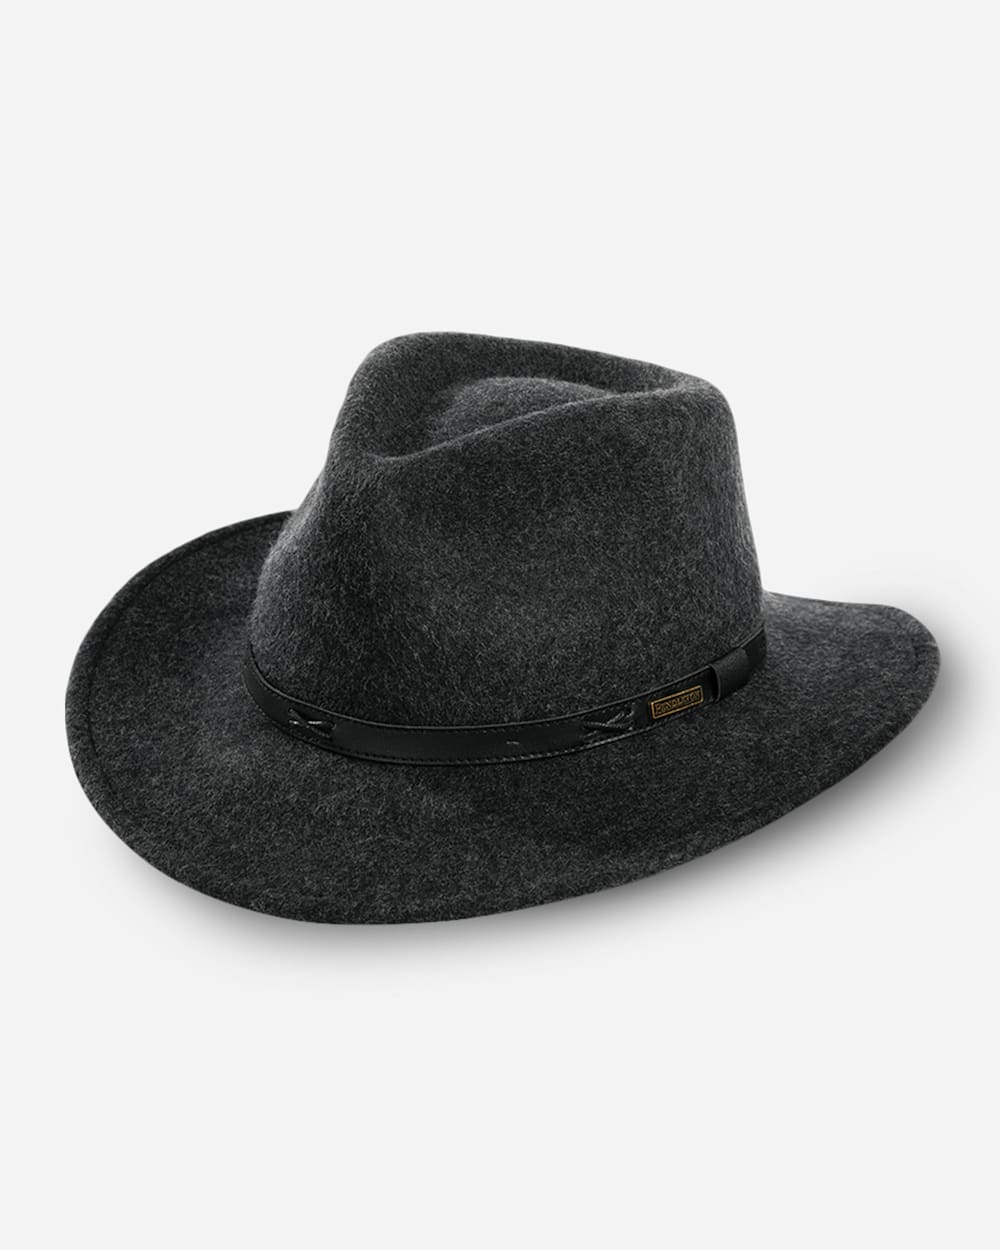 INDY HAT IN CHARCOAL image number 1